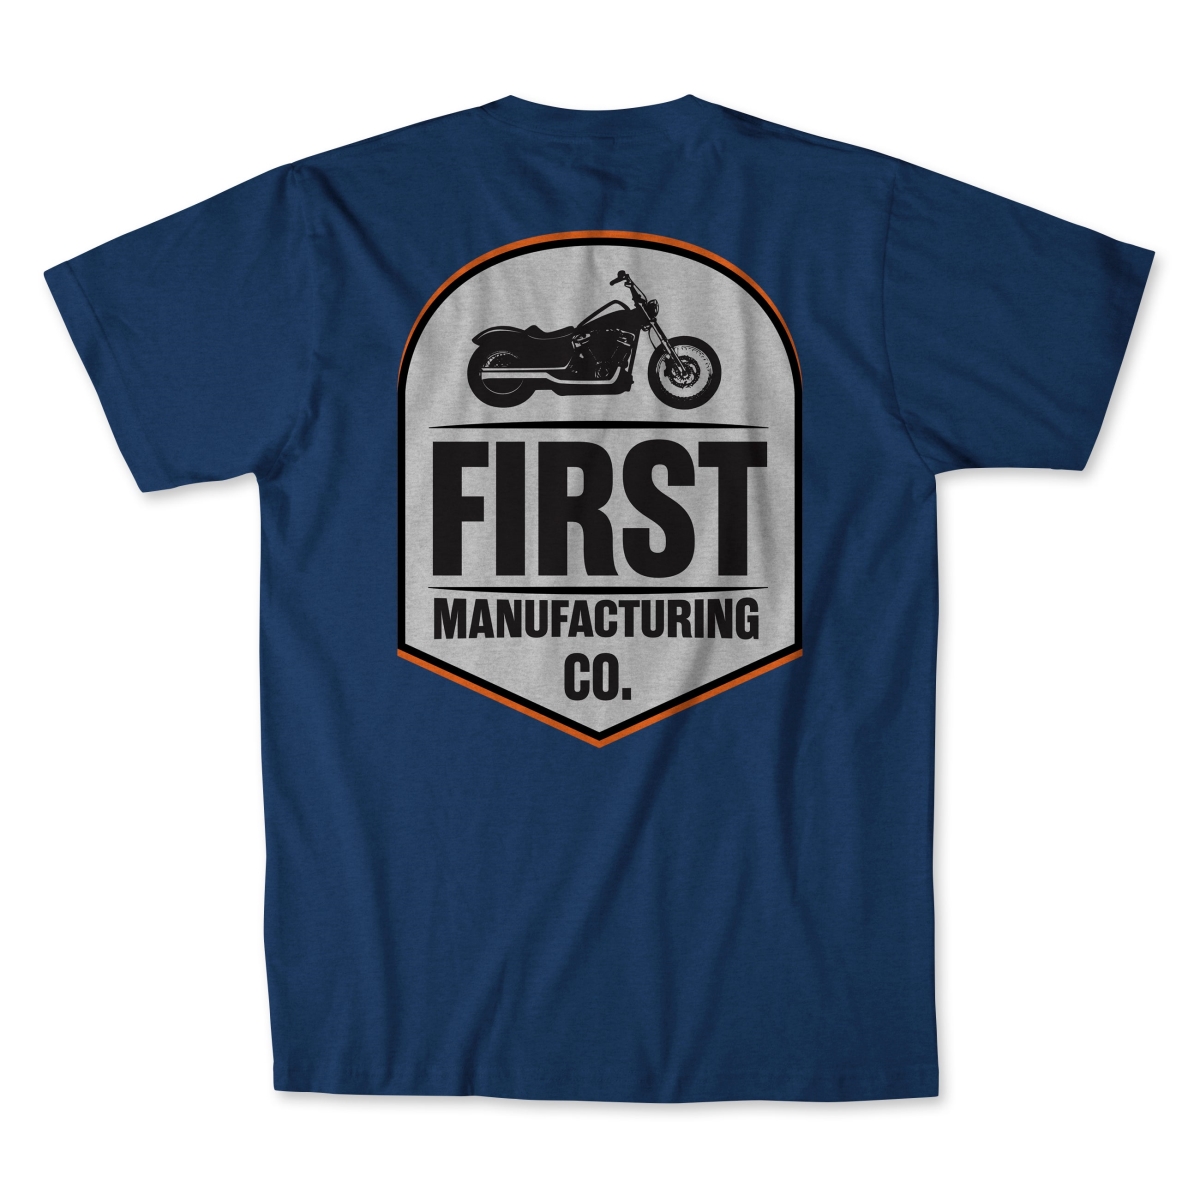 Picture of First Manufacturing FIT-006-XL-NBLUE T-Shirt with Bike Logo, Navy Blue - Extra Large